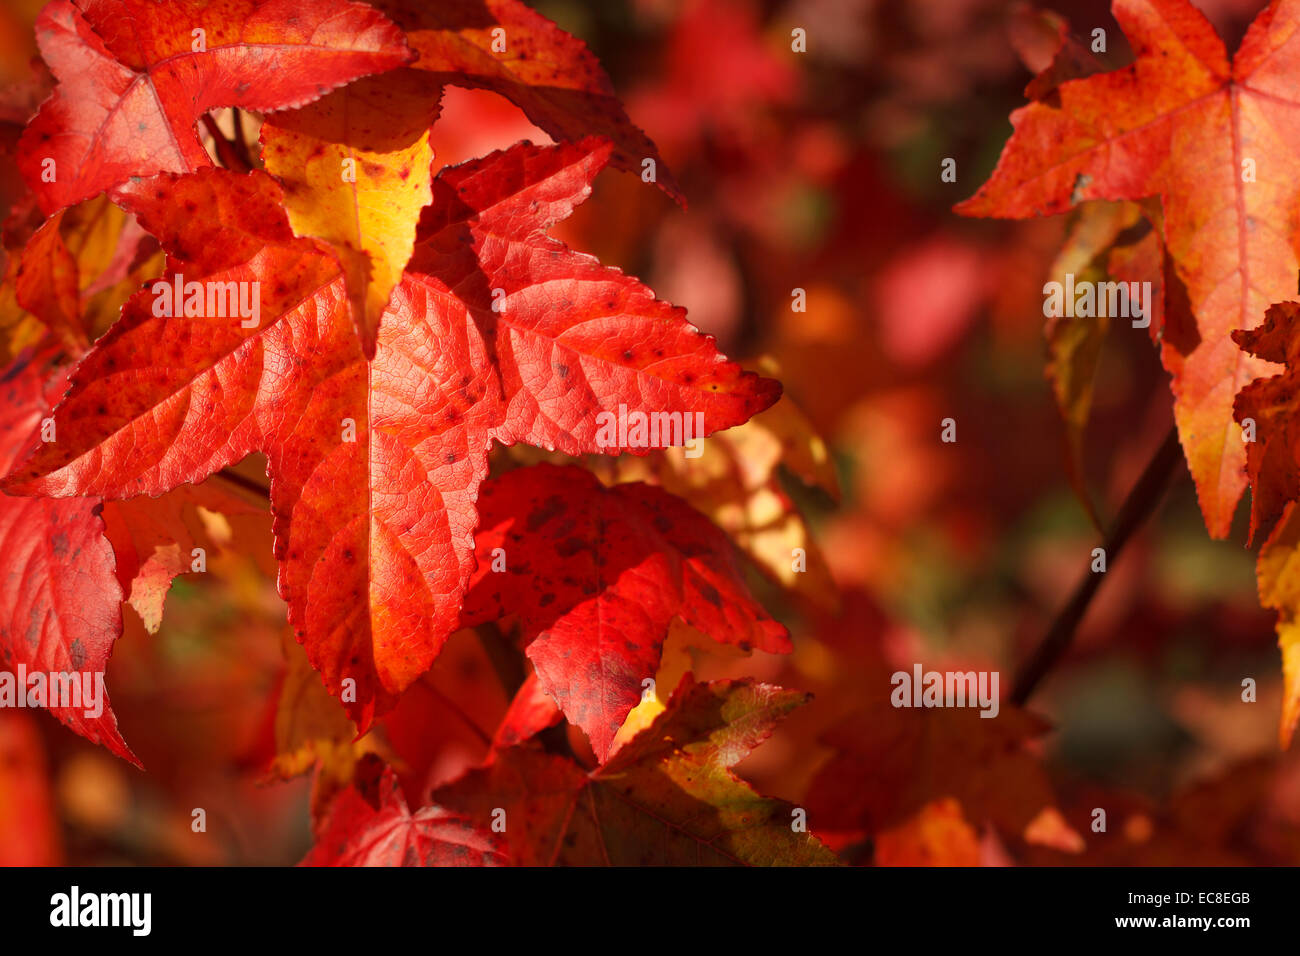 red autumn leaves close-up Stock Photo